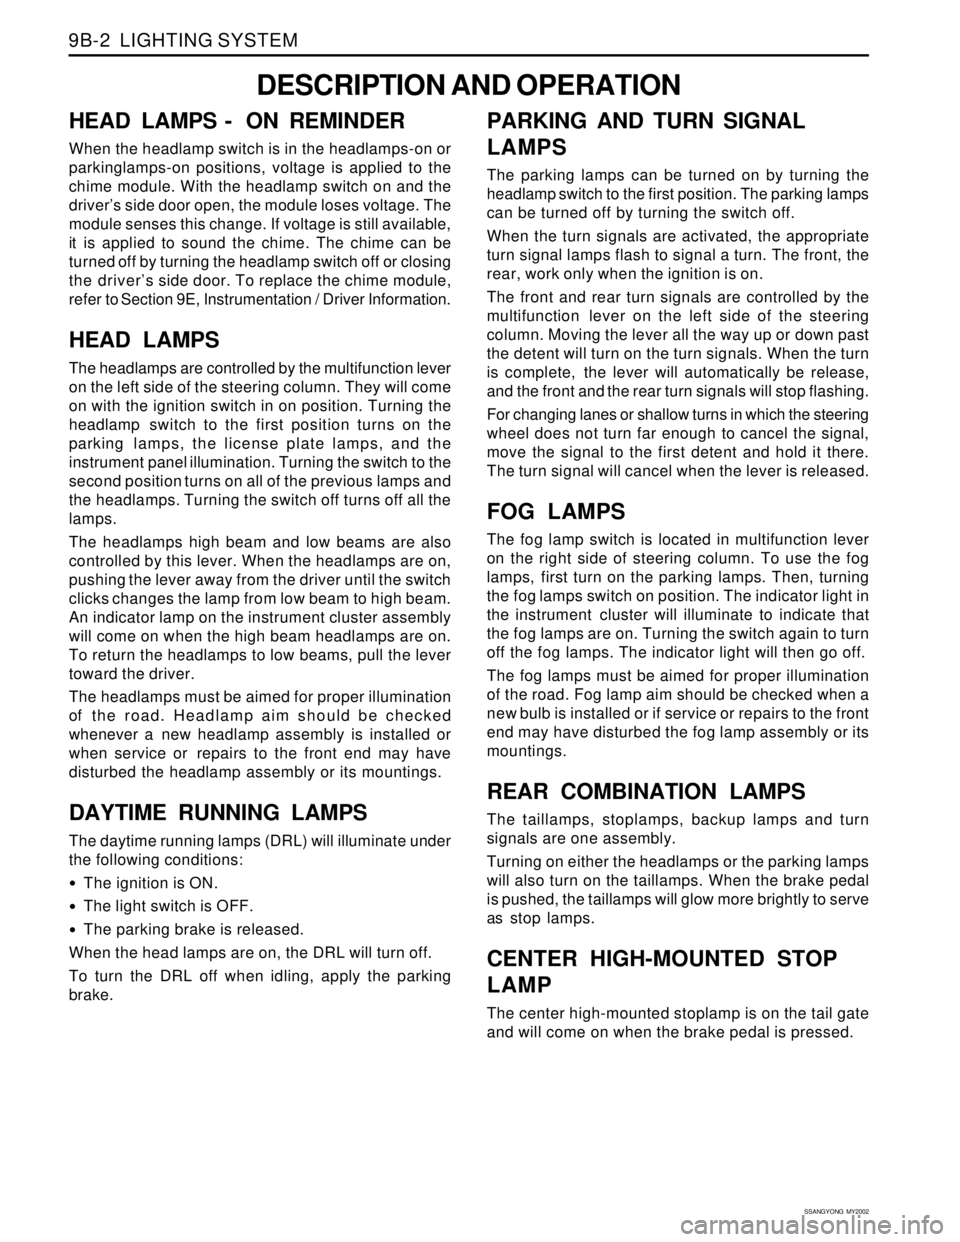 SSANGYONG KORANDO 1997  Service Repair Manual SSANGYONG  MY2002
9B-2  LIGHTING SYSTEM
DESCRIPTION AND OPERATION
HEAD LAMPS -  ON REMINDER
When the headlamp switch is in the headlamps-on or
parkinglamps-on positions, voltage is applied to the
chim